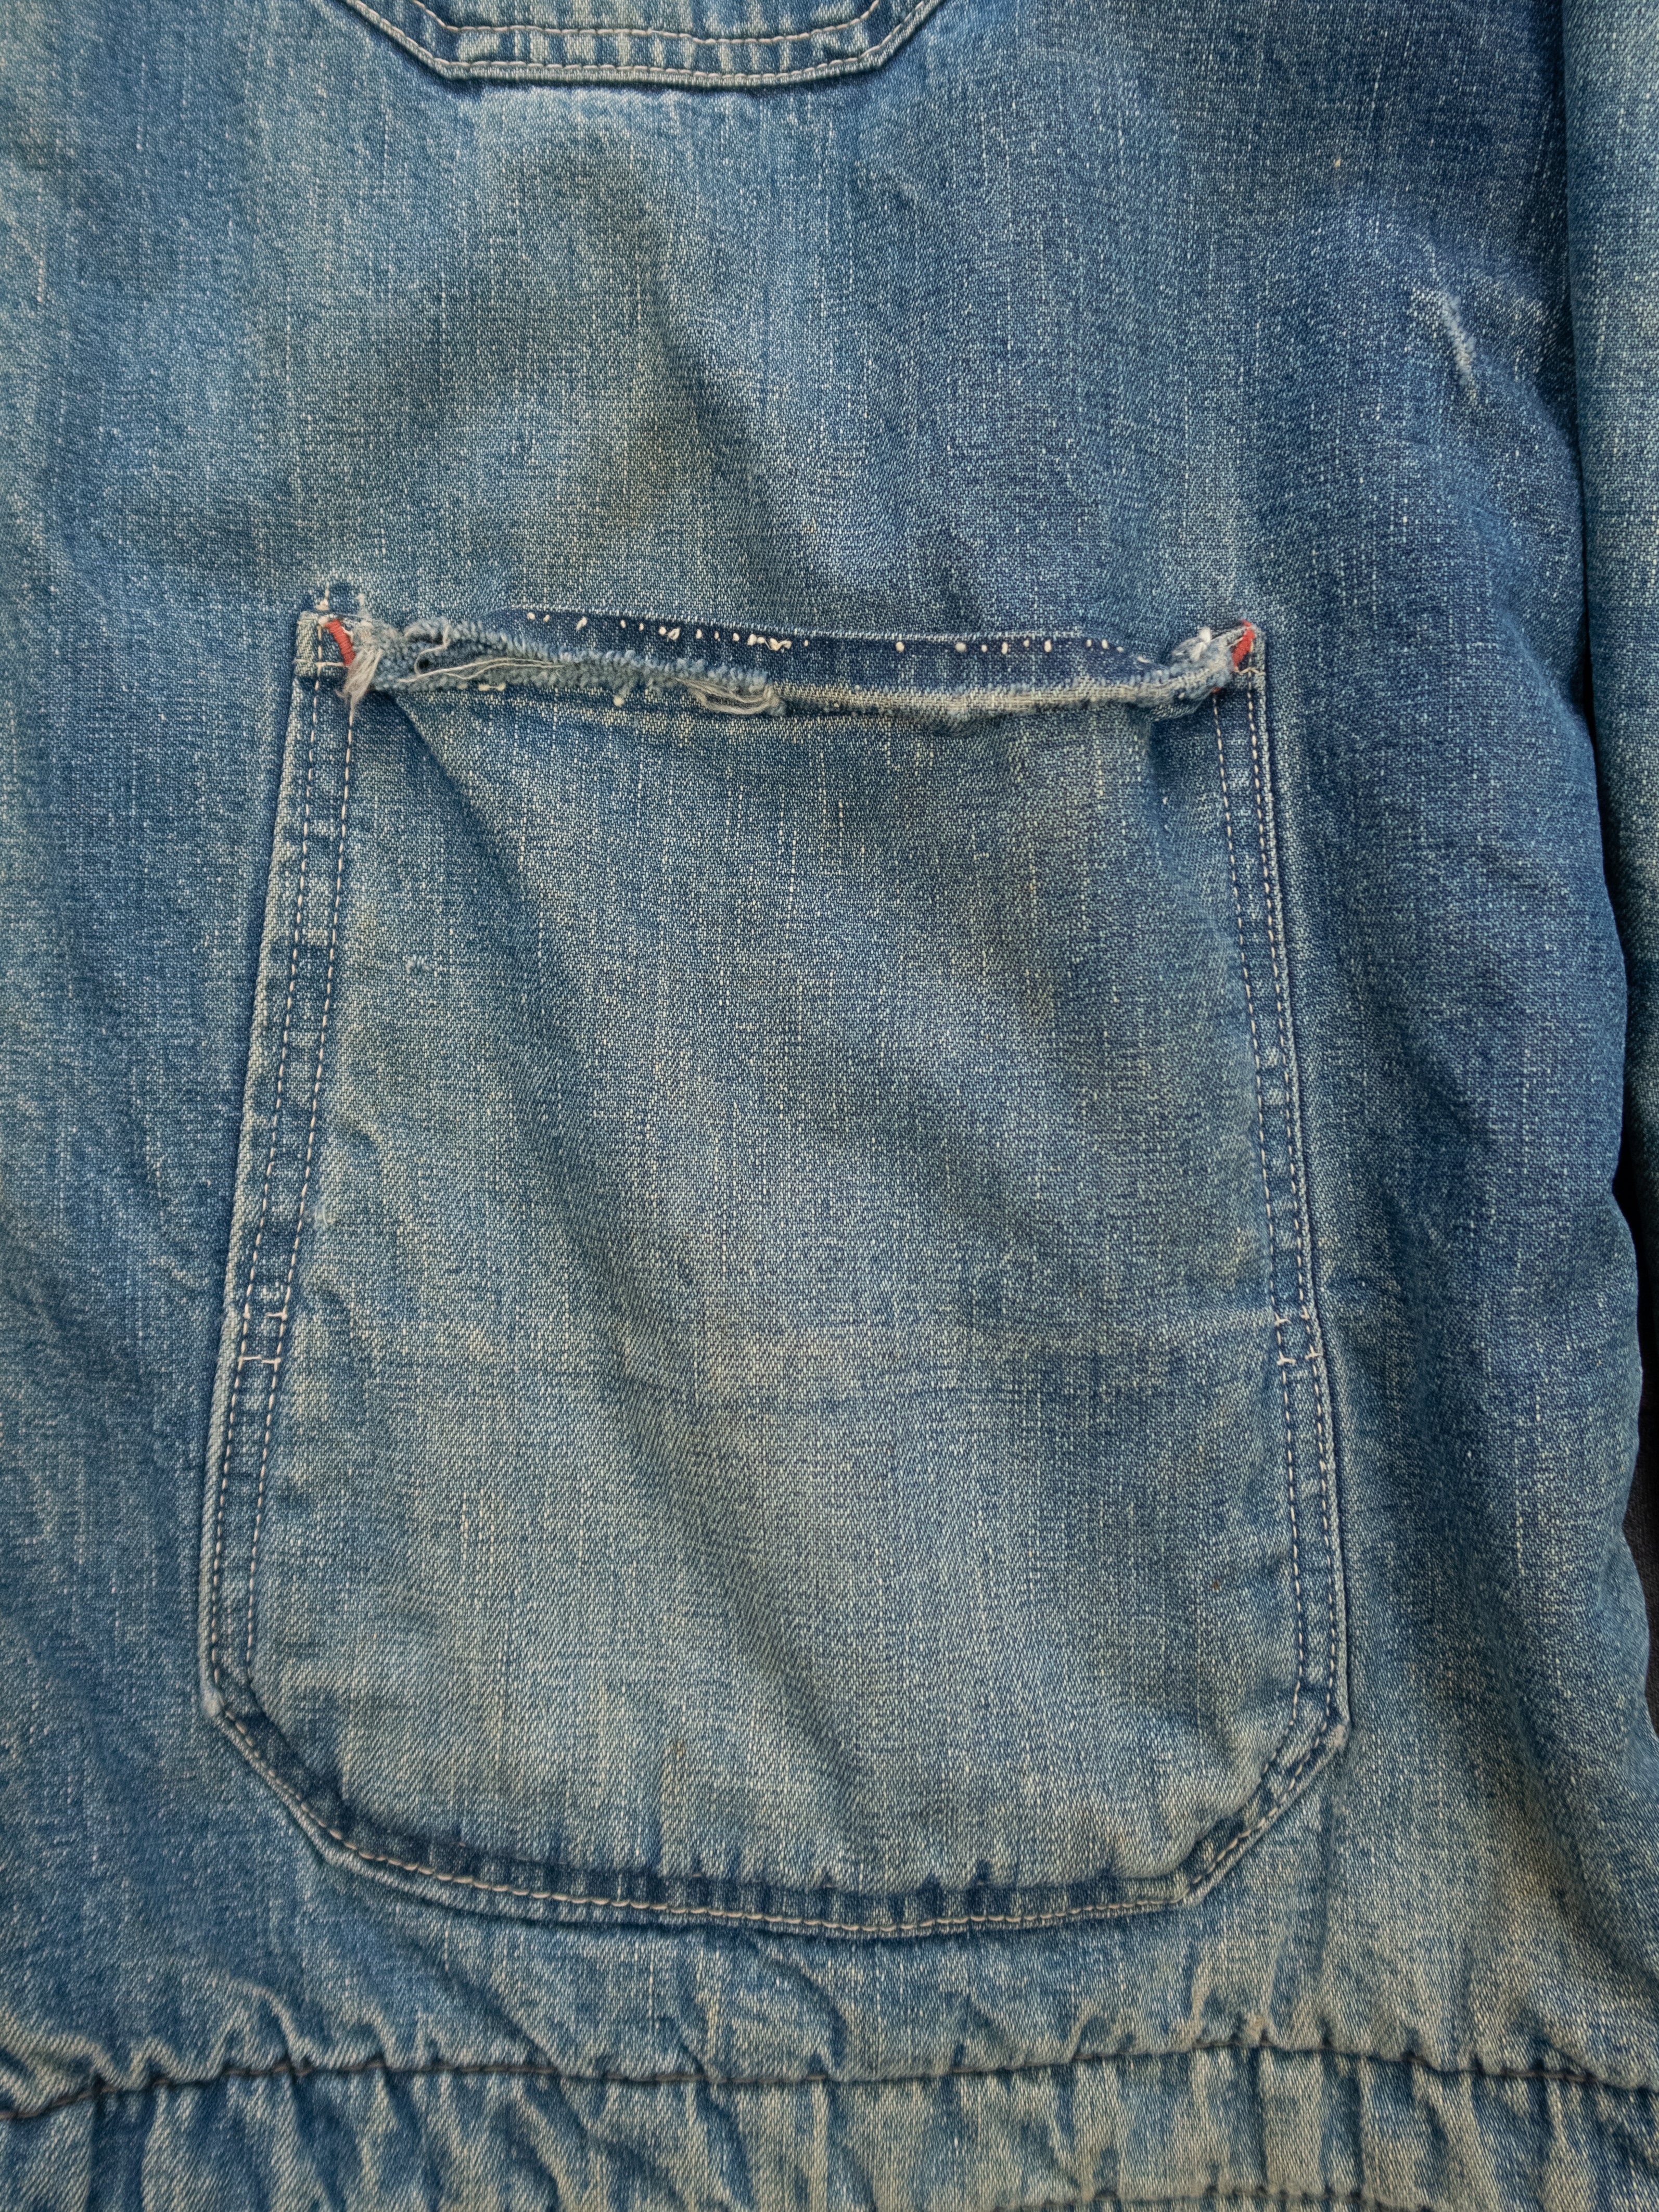 1950s Penneys Pay Day Denim Chore Jacket Size XL